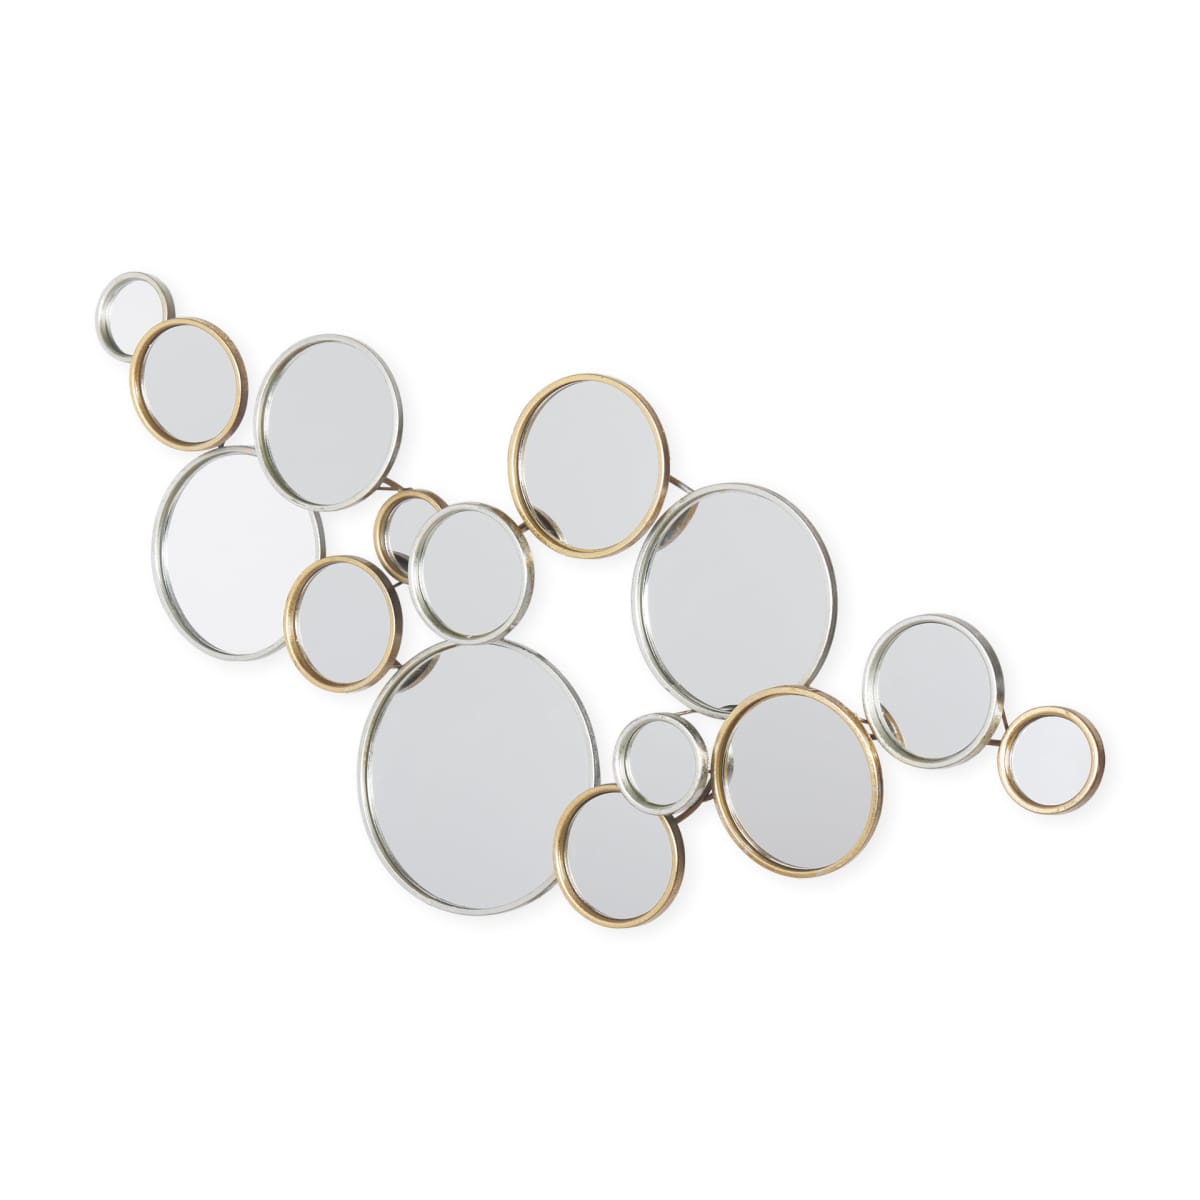 Halenday Wall Mirror Gold Metal - wall-mirrors-grouped